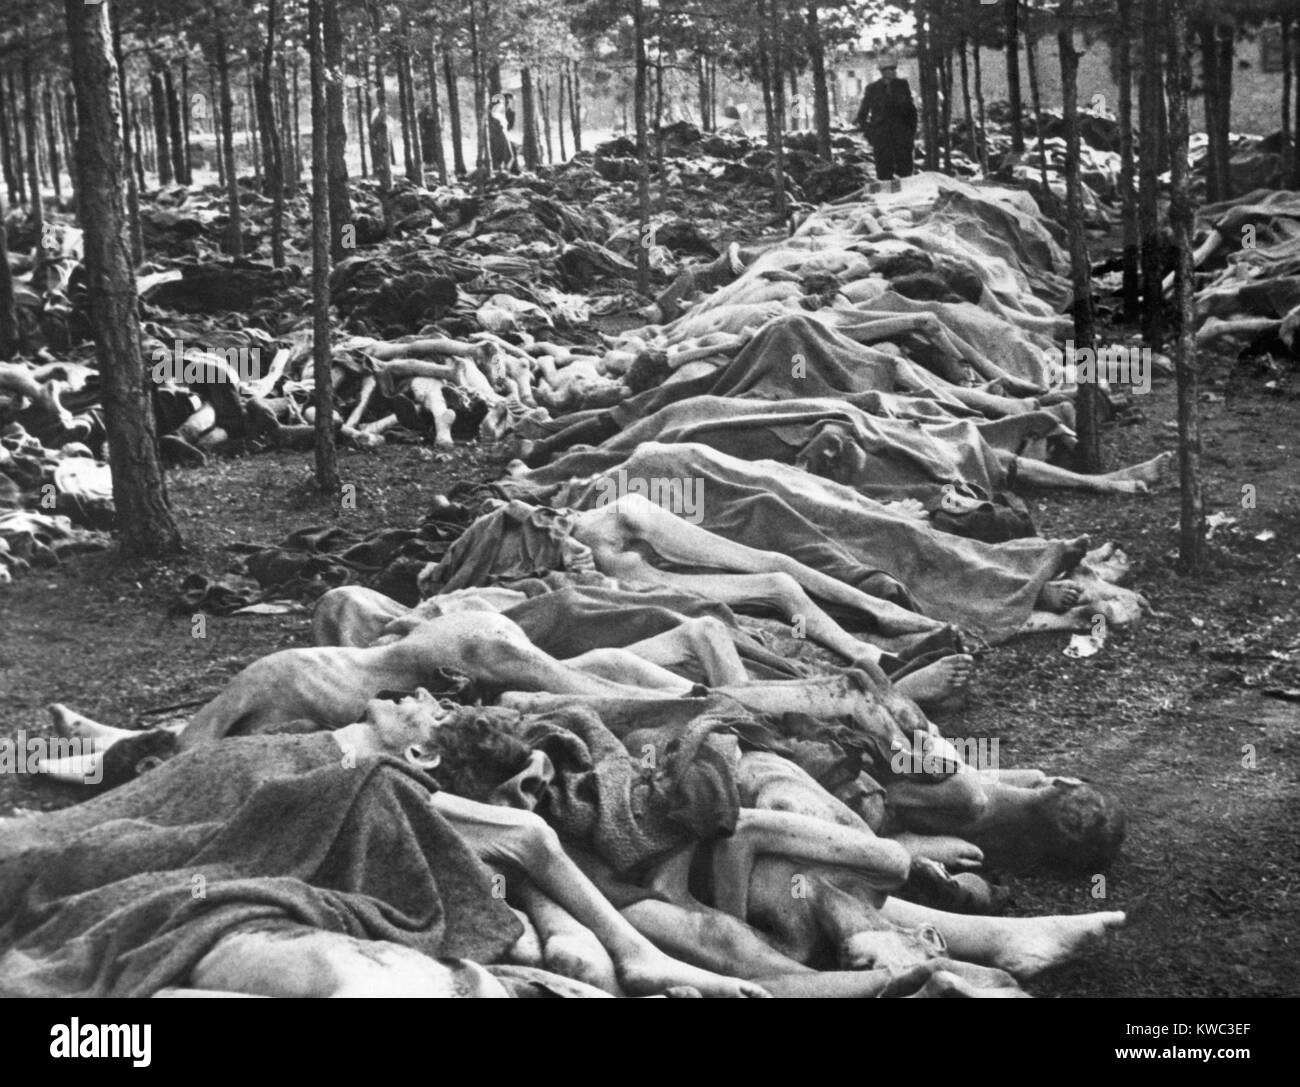 Rows of bodies at Nazi-German Belsen Concentration Camp on April 15, 1945. They were among thousands of corpses that lay unburied on the camp grounds when the camp was liberated by British Army, World War 2 (BSLOC 2015 13 7) Stock Photo